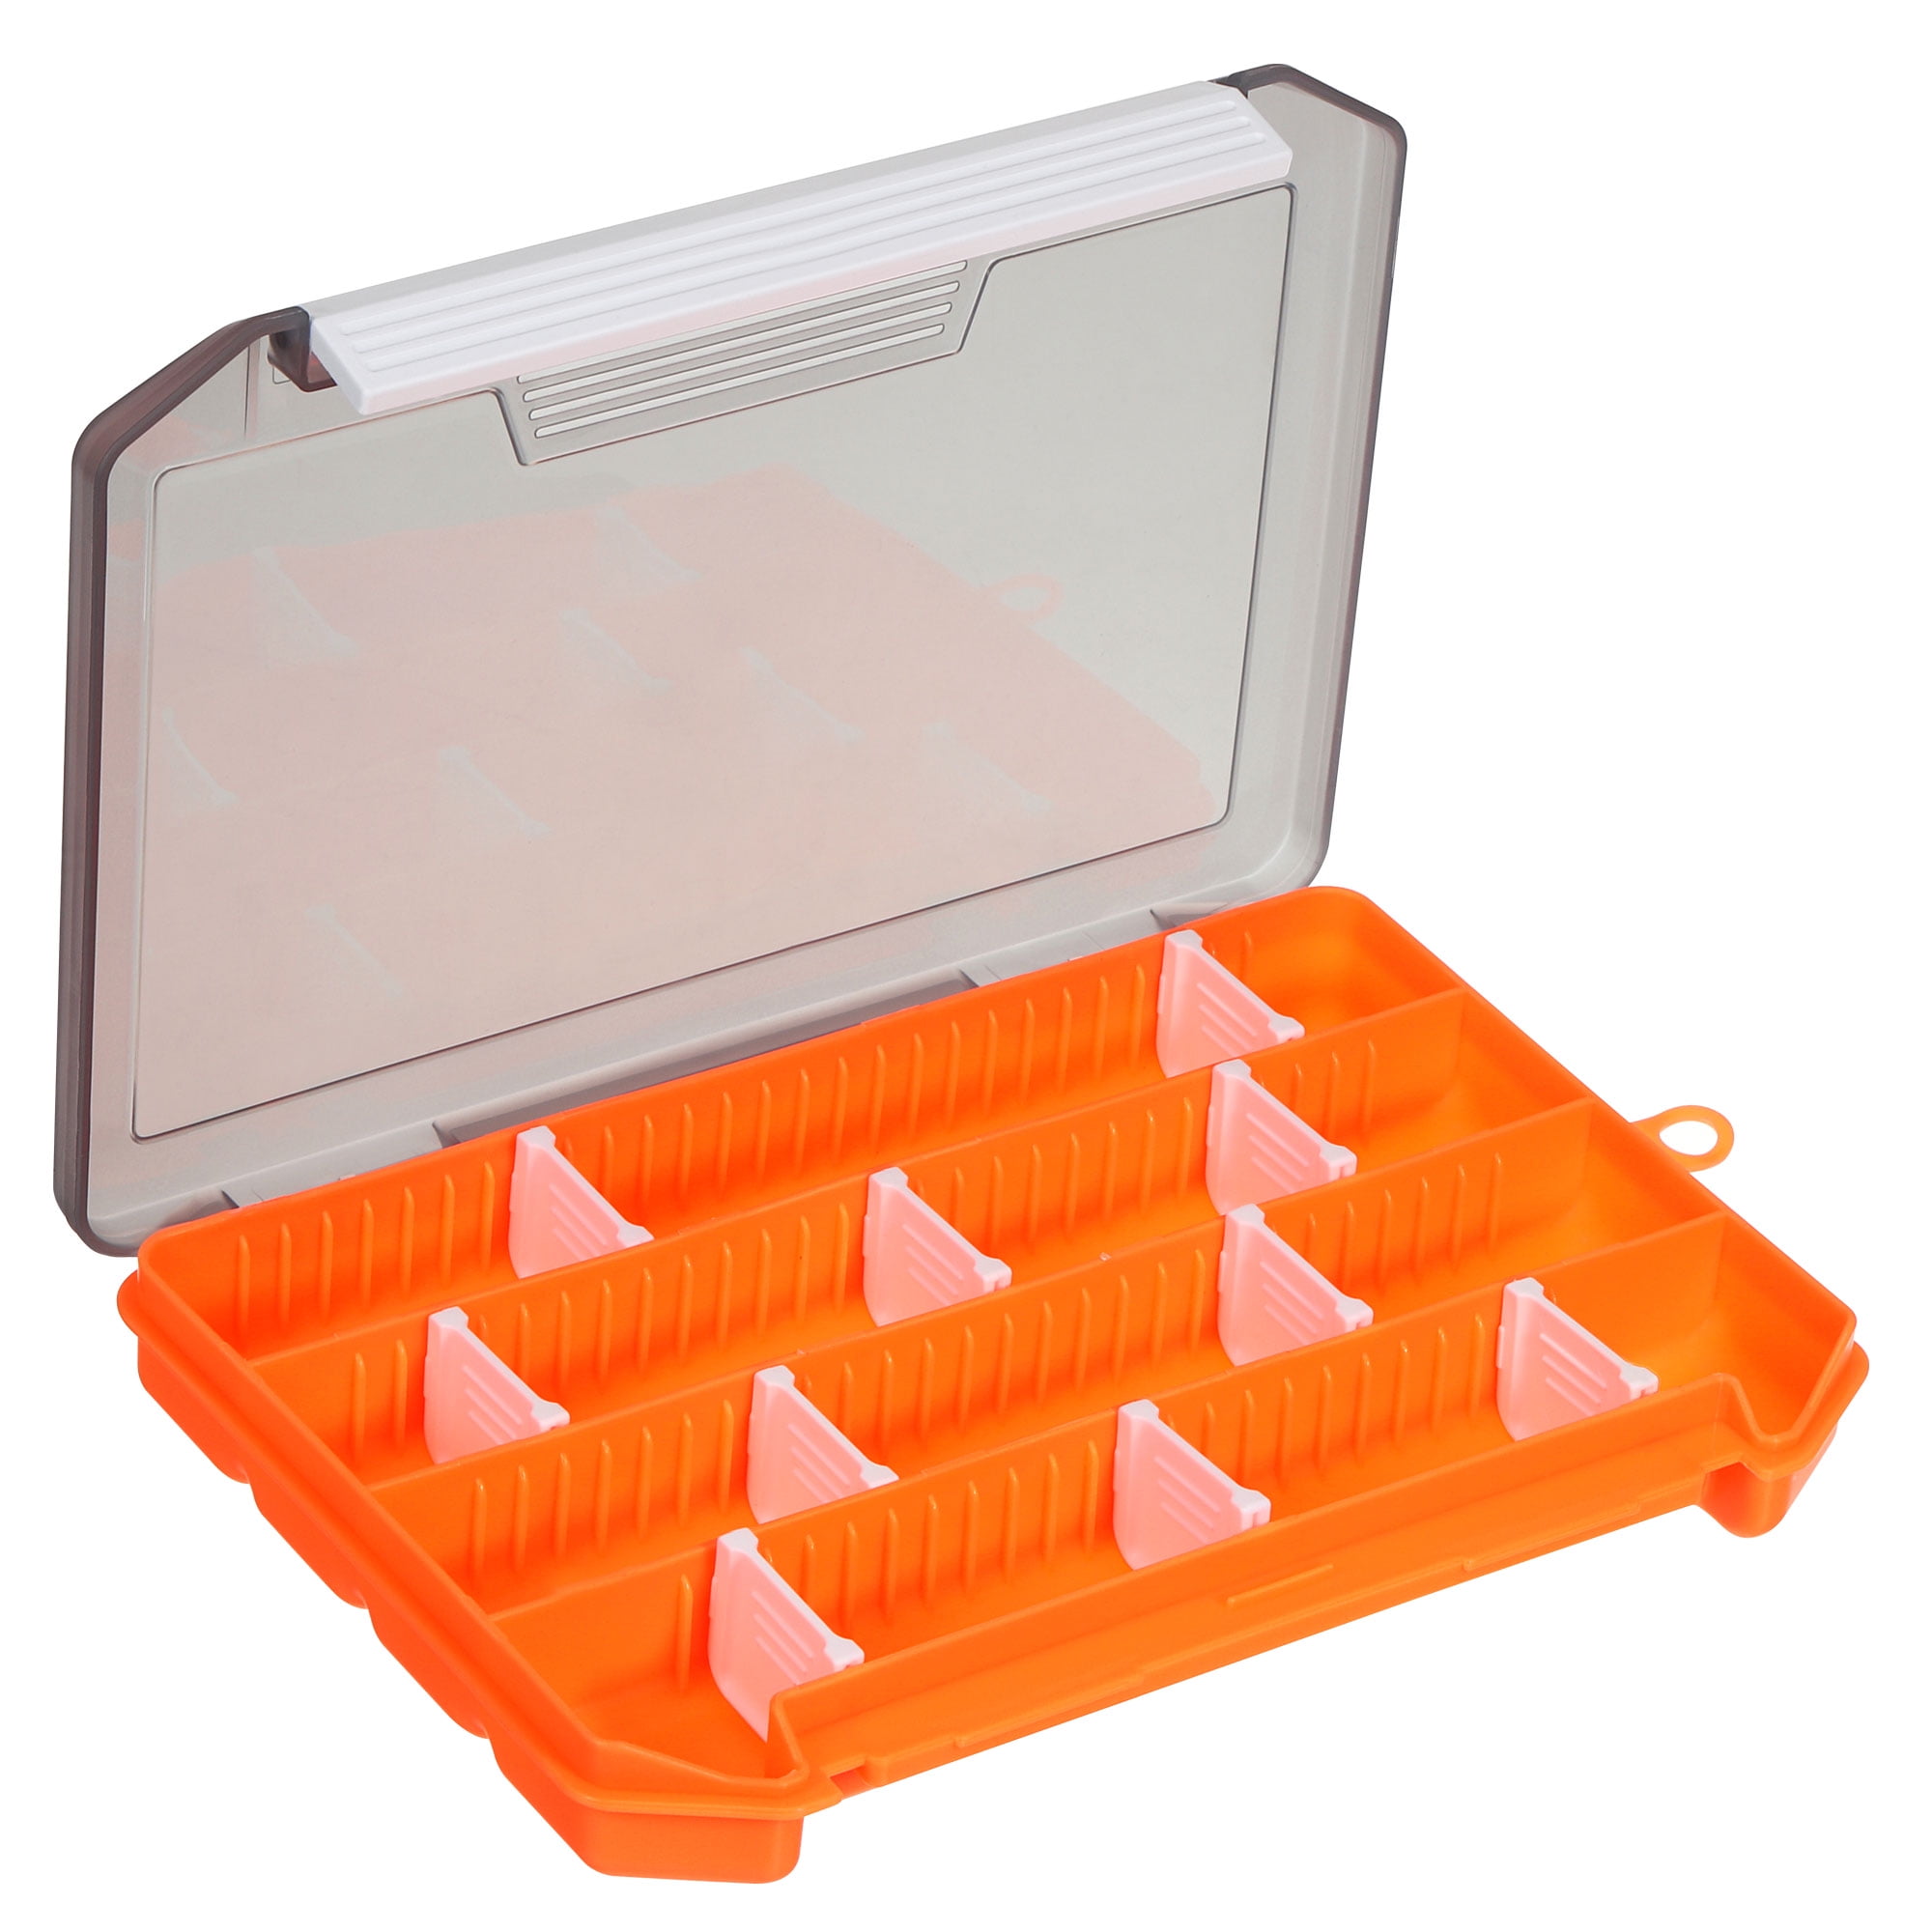 Waterproof Fishing Lure Box, Fish Tackle Accessory Storage Container, Pink